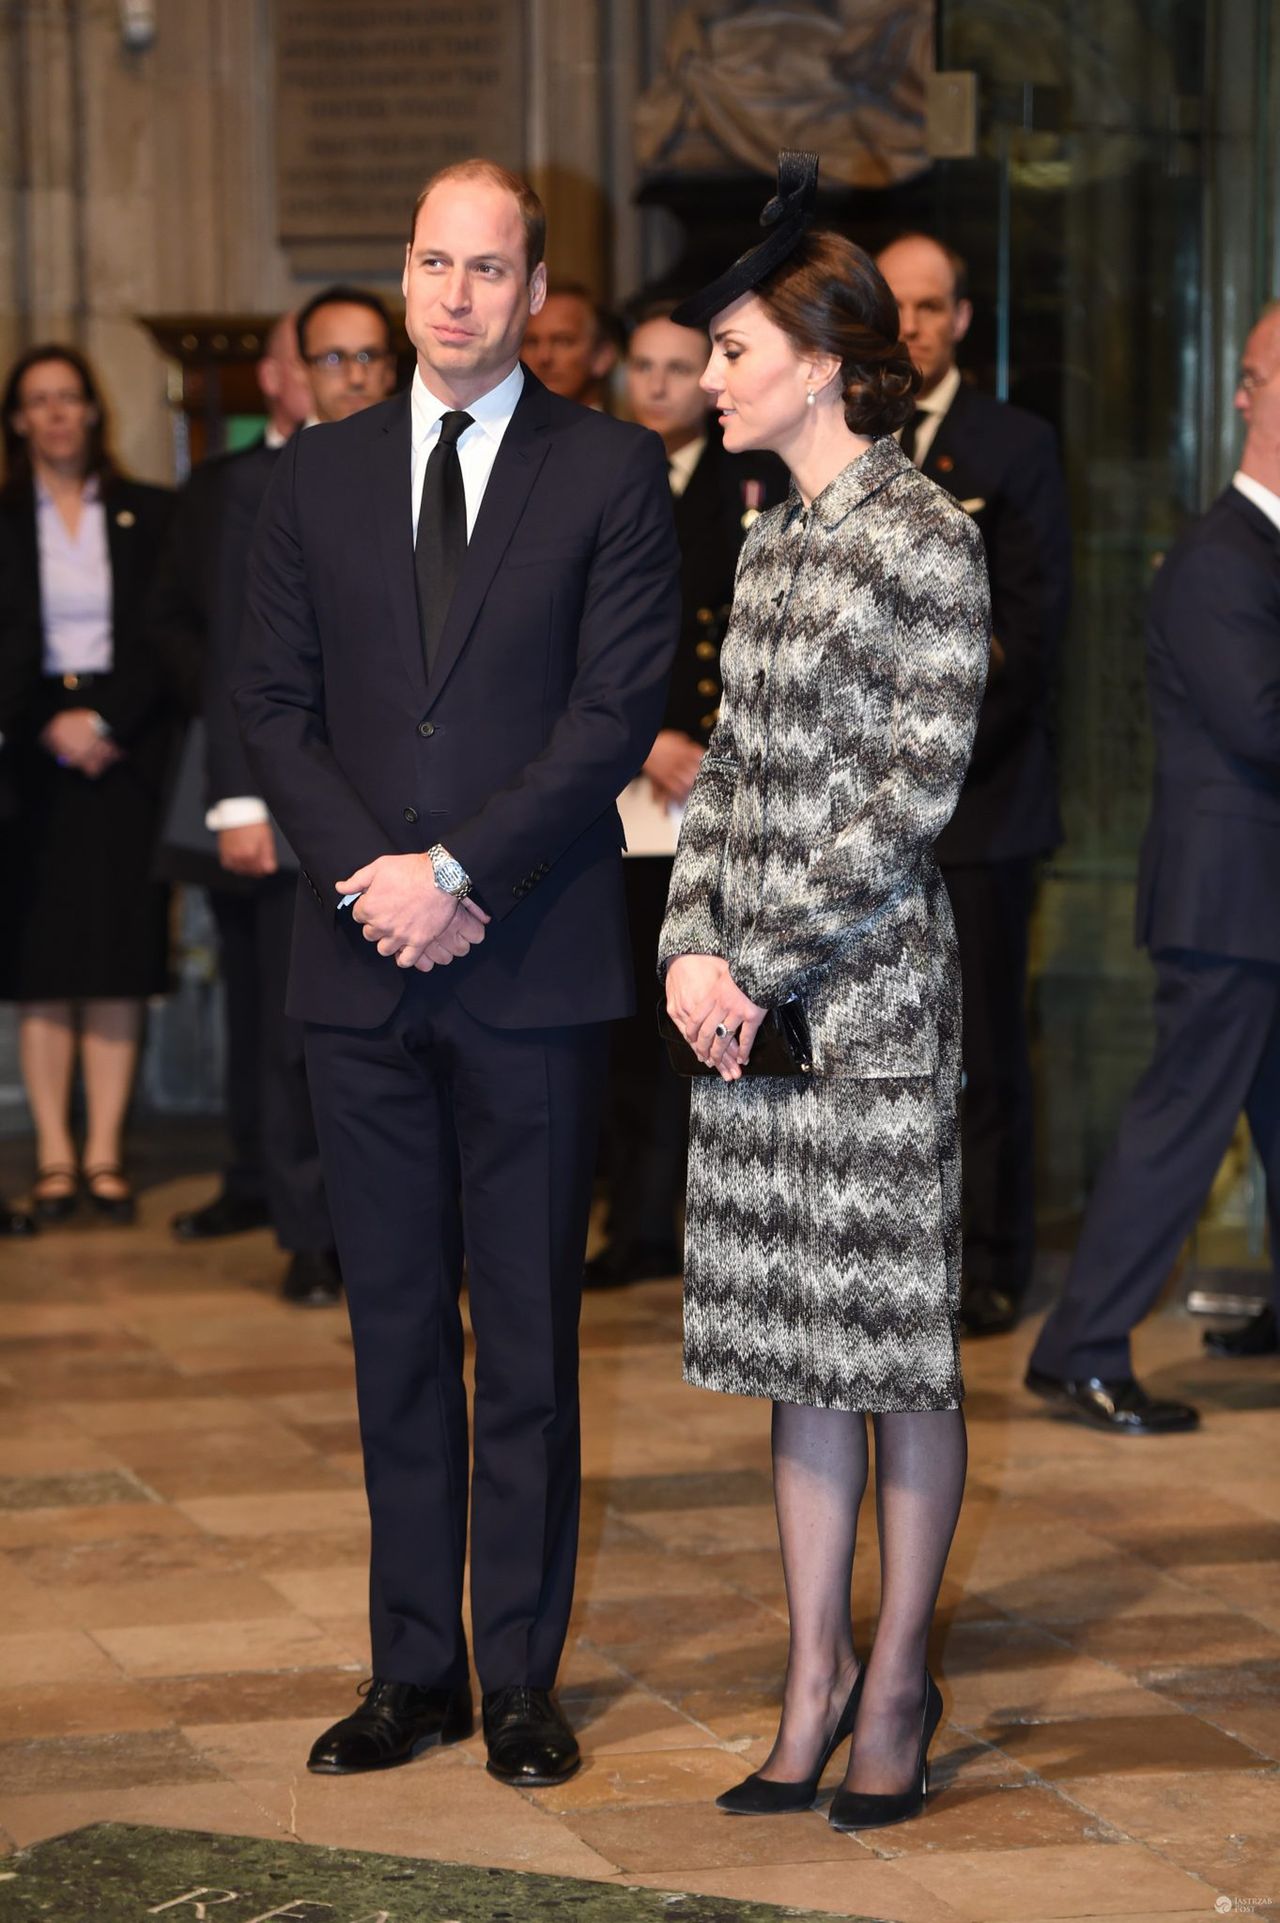 The Duke and Duchess of Cambridge and Prince Harry to attend Service of Hope following the Westminster terror Accredited media, both Rota and Fixed point, should report to the Yard Beadle Box at the entrance to Dean's Yard in Broad Sanctuary by 10.45hrs on Wednesday 5th April. attacks last week. Families of those killed in the attack, together with other victims, witnesses and first responders from the police, fire, ambulance and NHS hospital services will form part of the congregation. The Home Secretary, the Rt Hon Amber Rudd MP, The Mayor of London, Sadiq Khan, and the Acting Commissioner of the Metropolitan Police Craig Mackey will also be present.